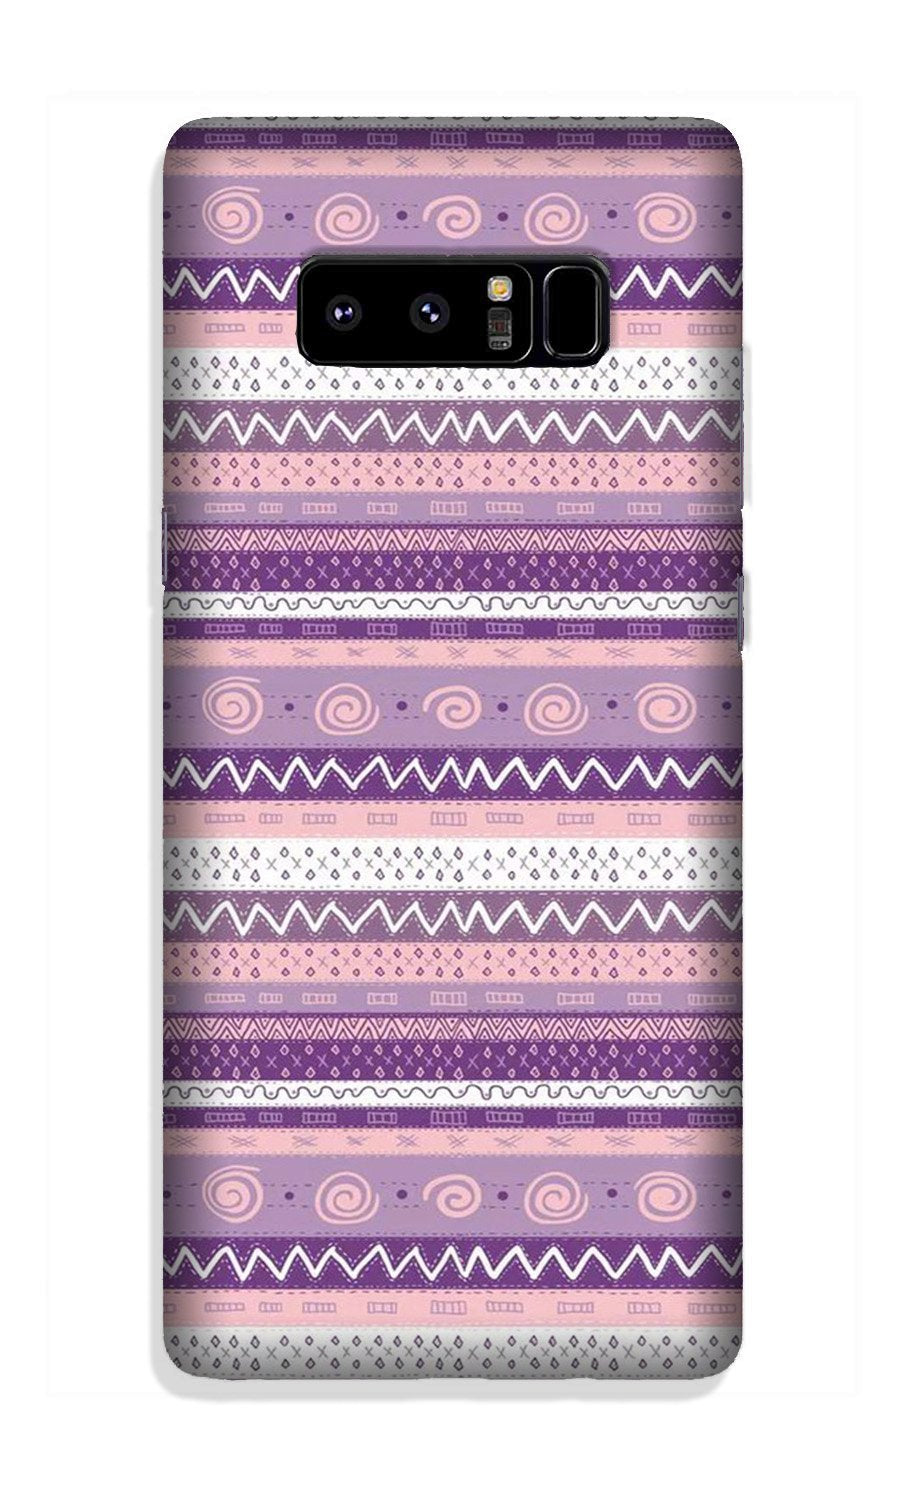 Zigzag line pattern3 Case for Galaxy Note 8